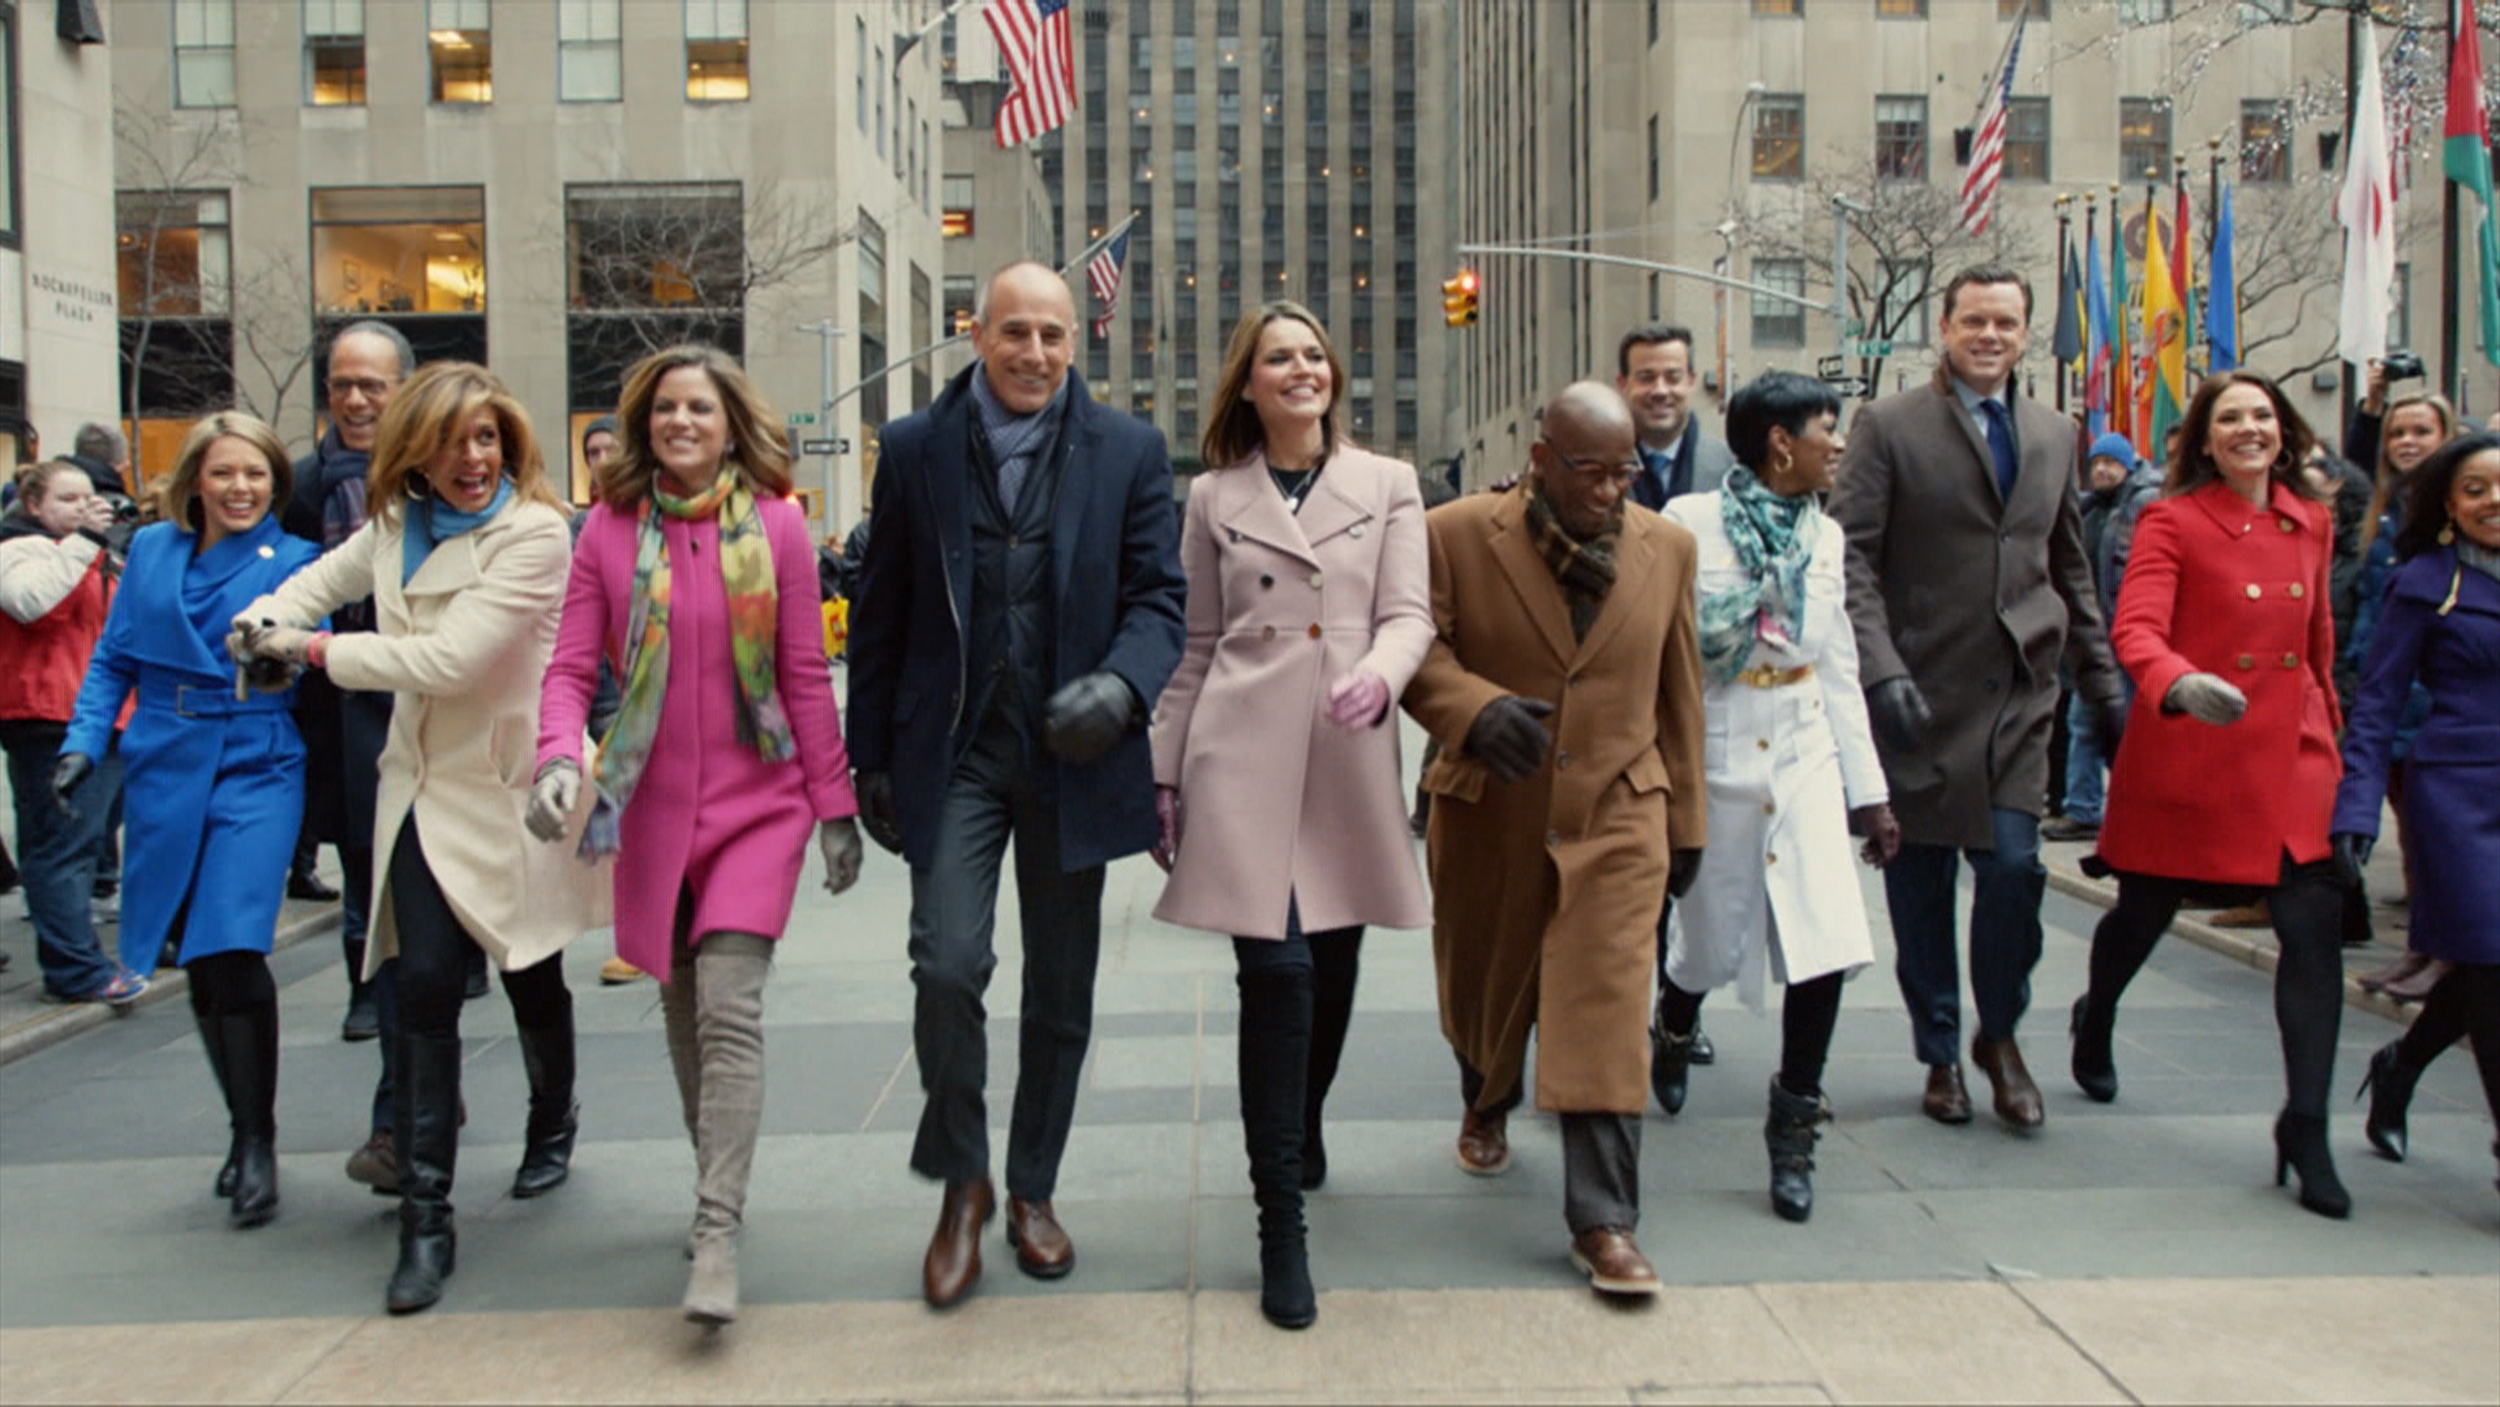 Super Bowl commercials 2015: Watch the TODAY Show 'Rise to Shine' in our very own ad ...2500 x 1407